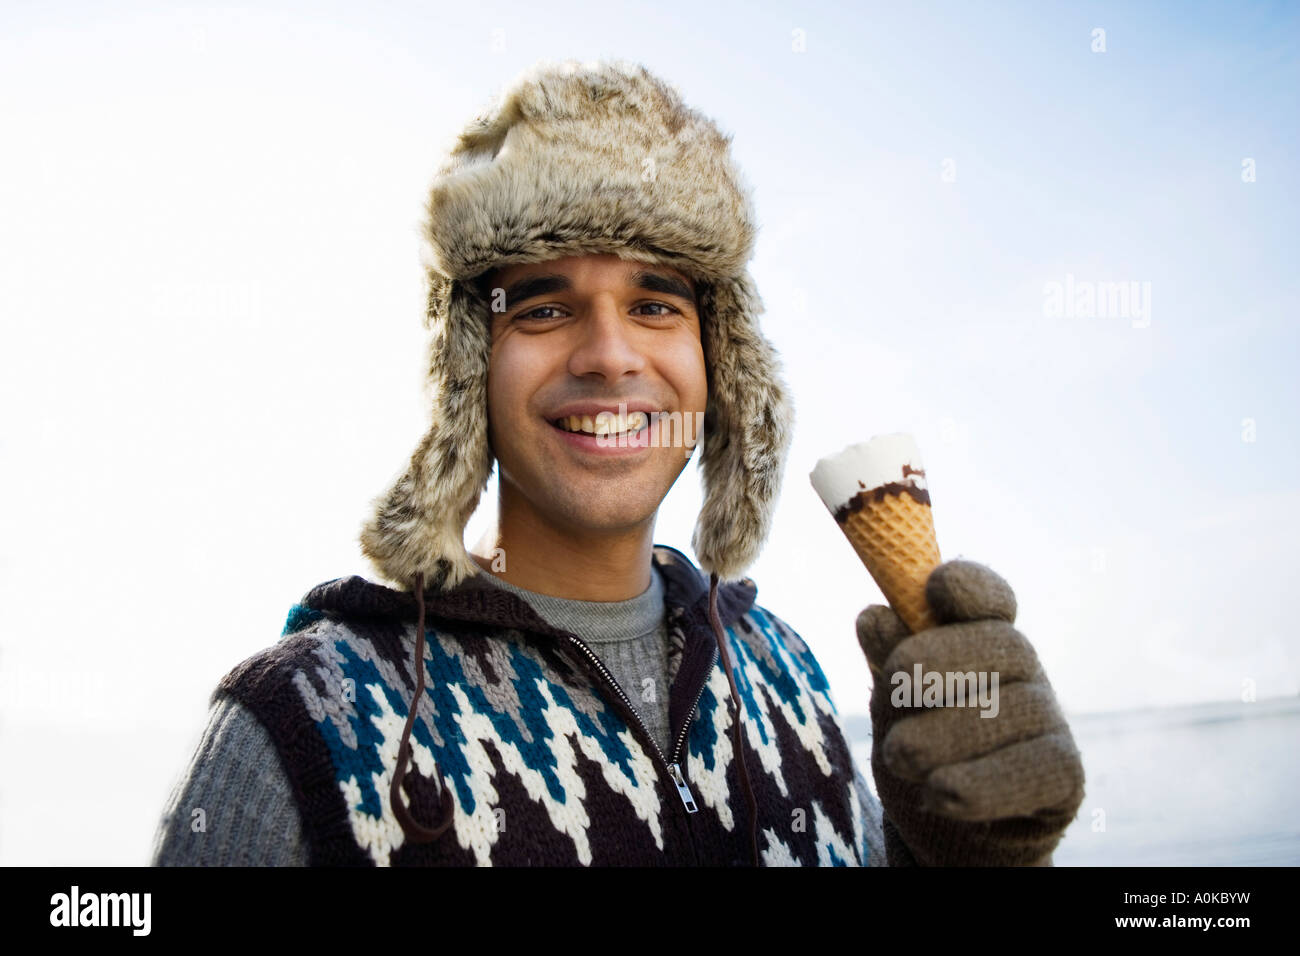 smiling man with fur hat having an ice cream Stock Photo